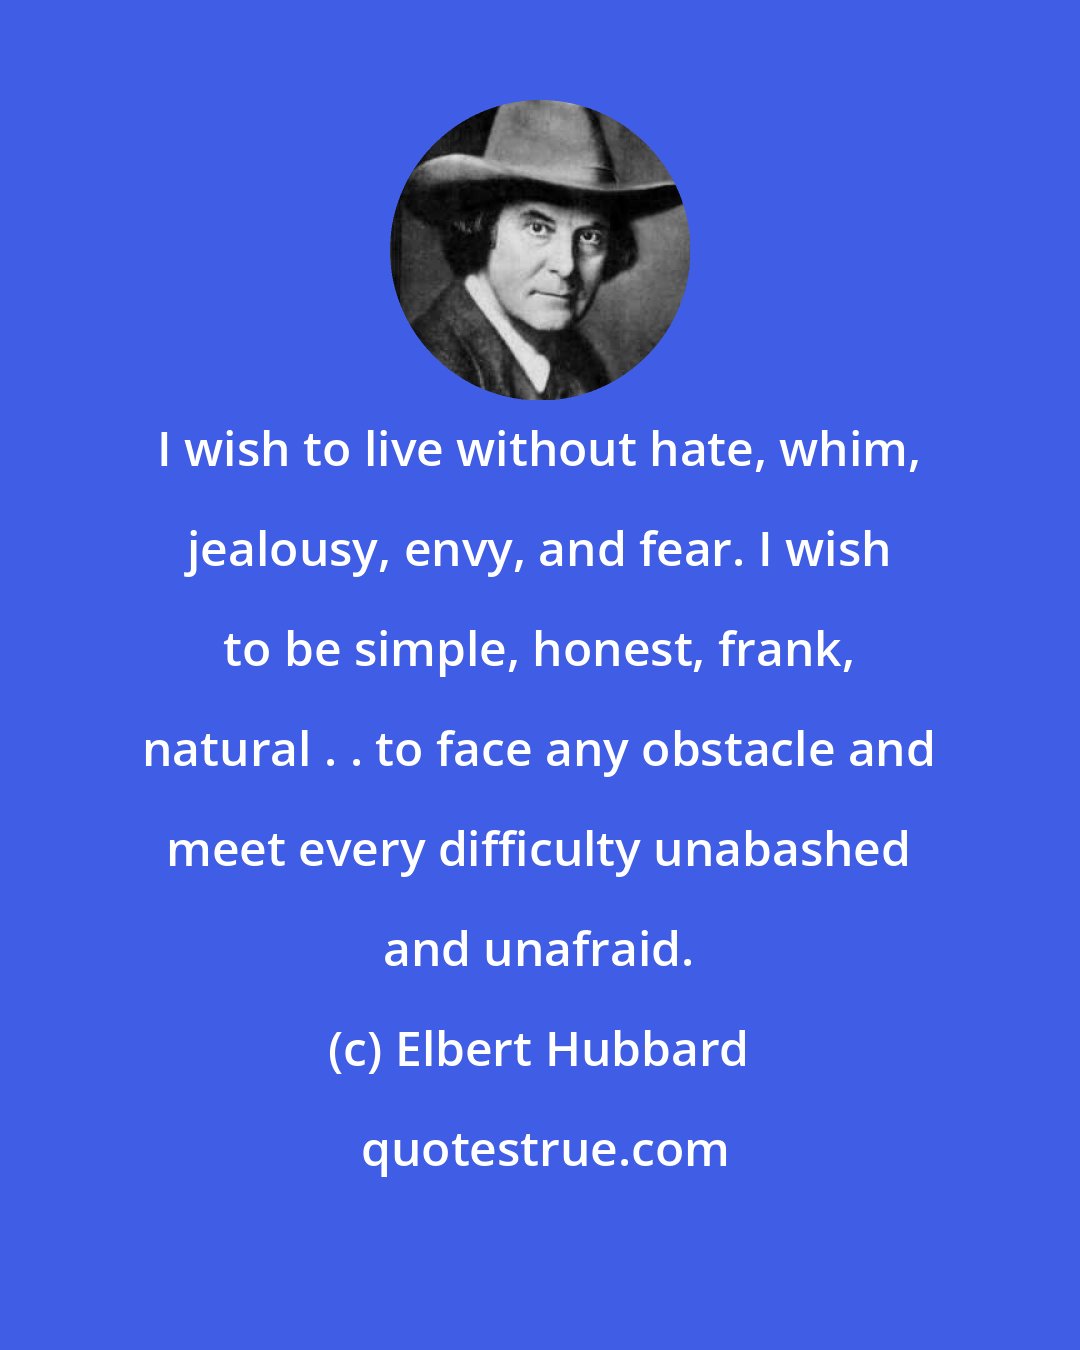 Elbert Hubbard: I wish to live without hate, whim, jealousy, envy, and fear. I wish to be simple, honest, frank, natural . . to face any obstacle and meet every difficulty unabashed and unafraid.